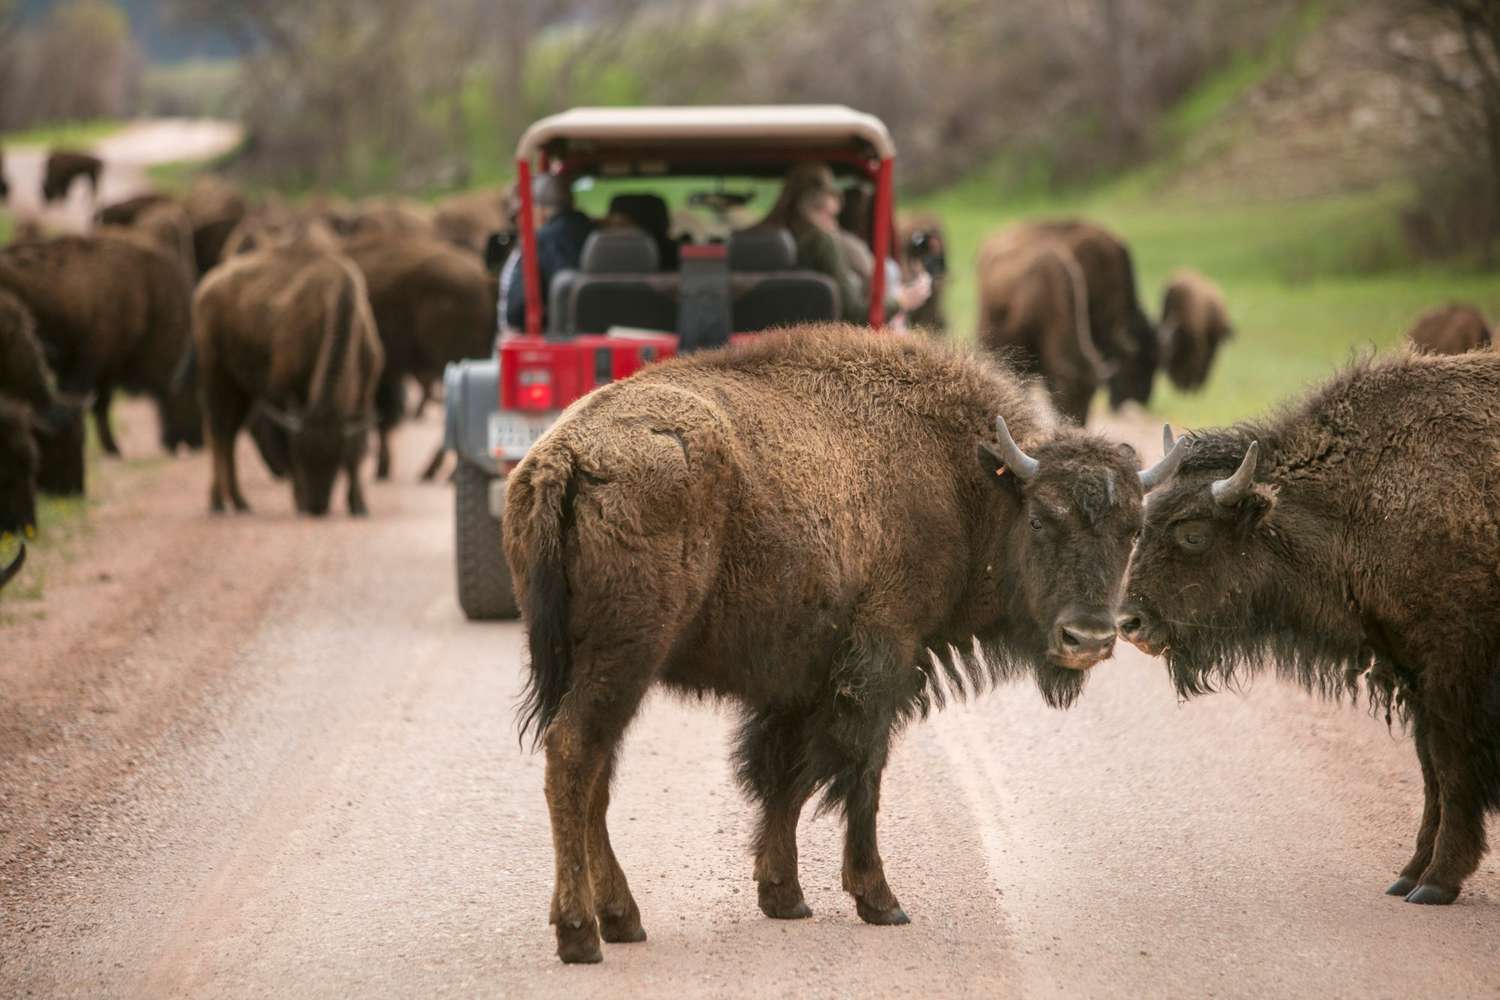 American bison on road at Custer State Park